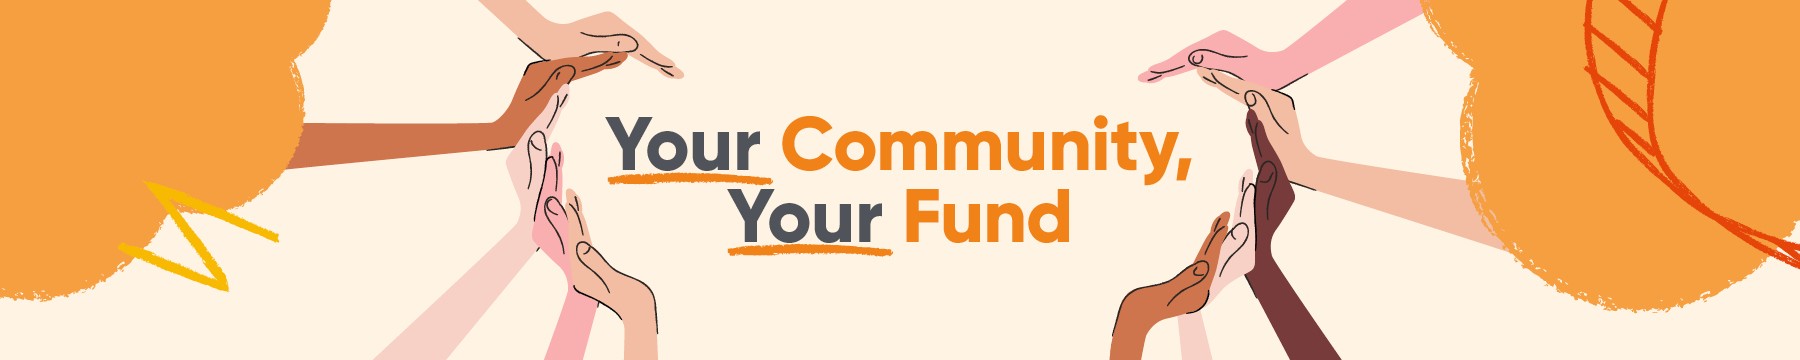 Your Community, Your Fund website banner